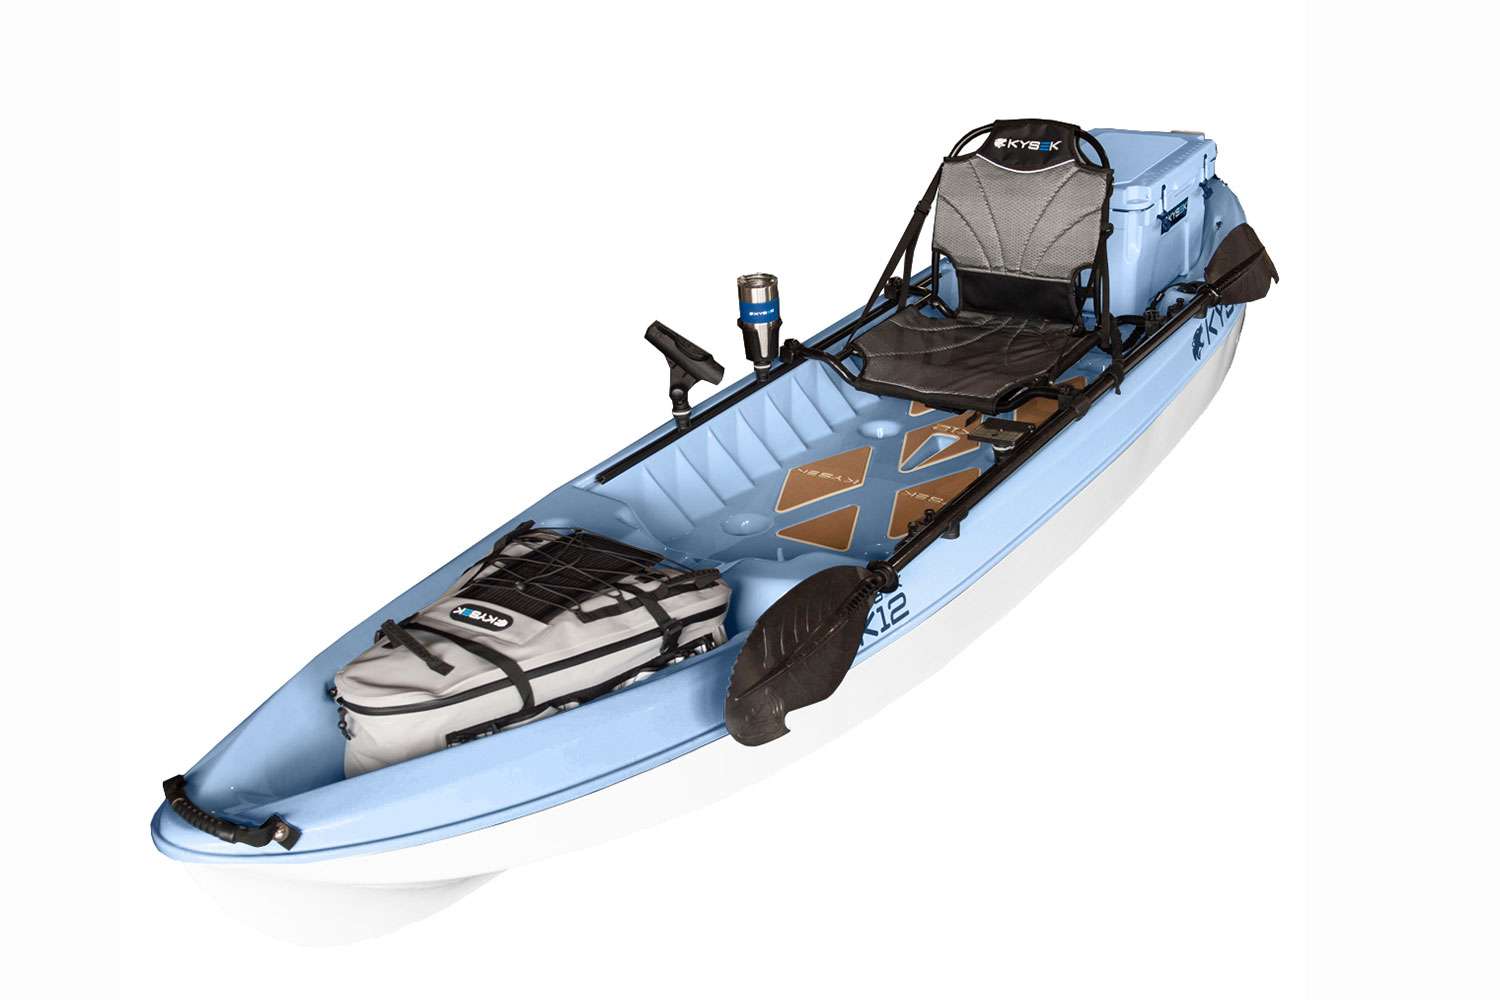 <p><b>Kysek K12 Kayak</b></p>
The Kysek K12 kayak is made of thermoformed ABS plastic, which makes it lighter and more abrasion resistant. The K12 comes standard with a custom dry bag, 25L Kysek ice chest, extra large seat, flush-mounted rod holders and more. Fish seated or standing, this kayak offers anglers with the most stable and comfortable experience on the water. <br>
<p><b>MSRP: $2,995</b></p>
<a href=